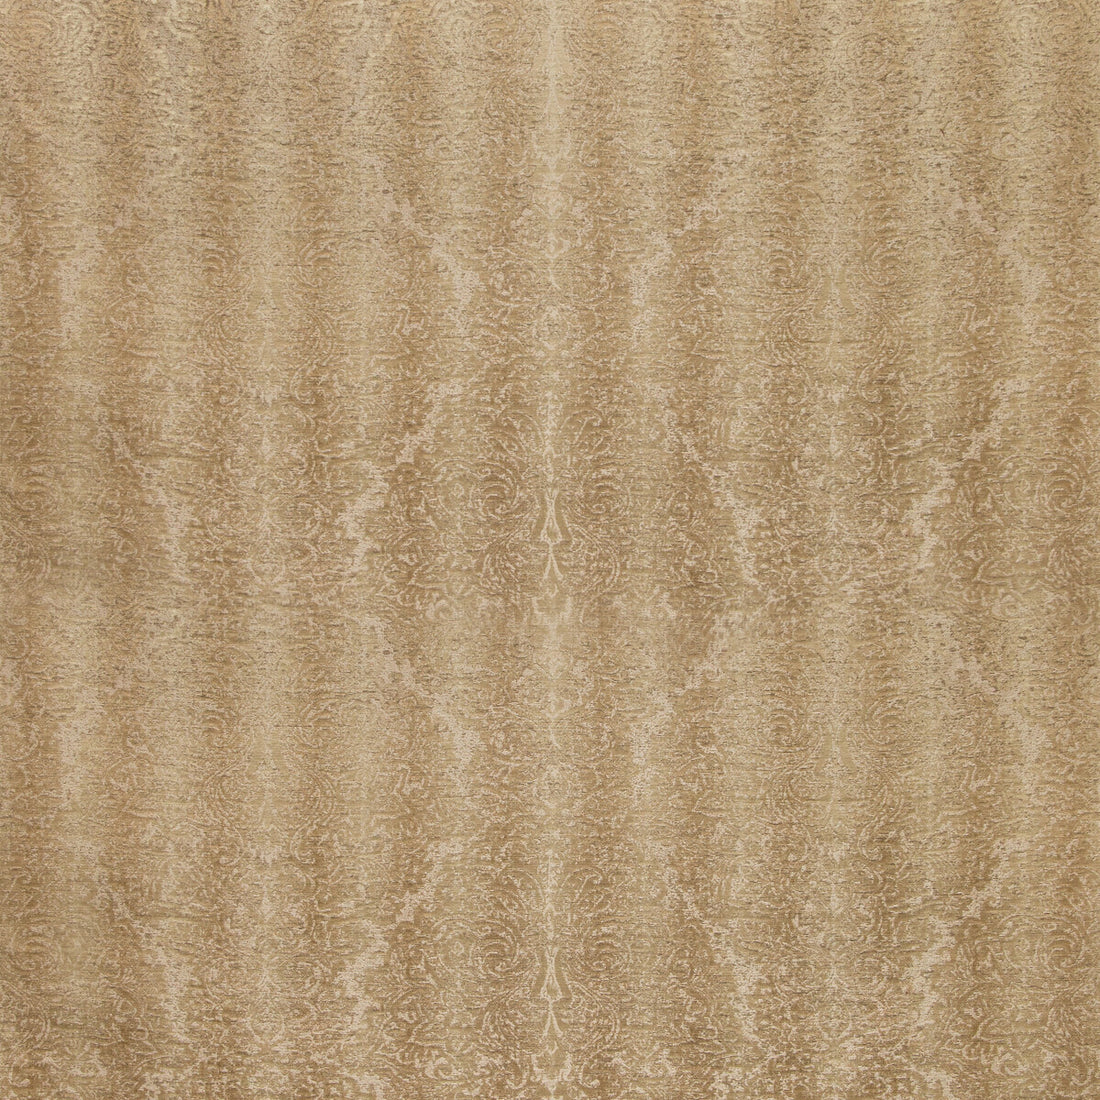 Shaw Damask fabric in sand color - pattern 2019104.16.0 - by Lee Jofa in the Manor House collection